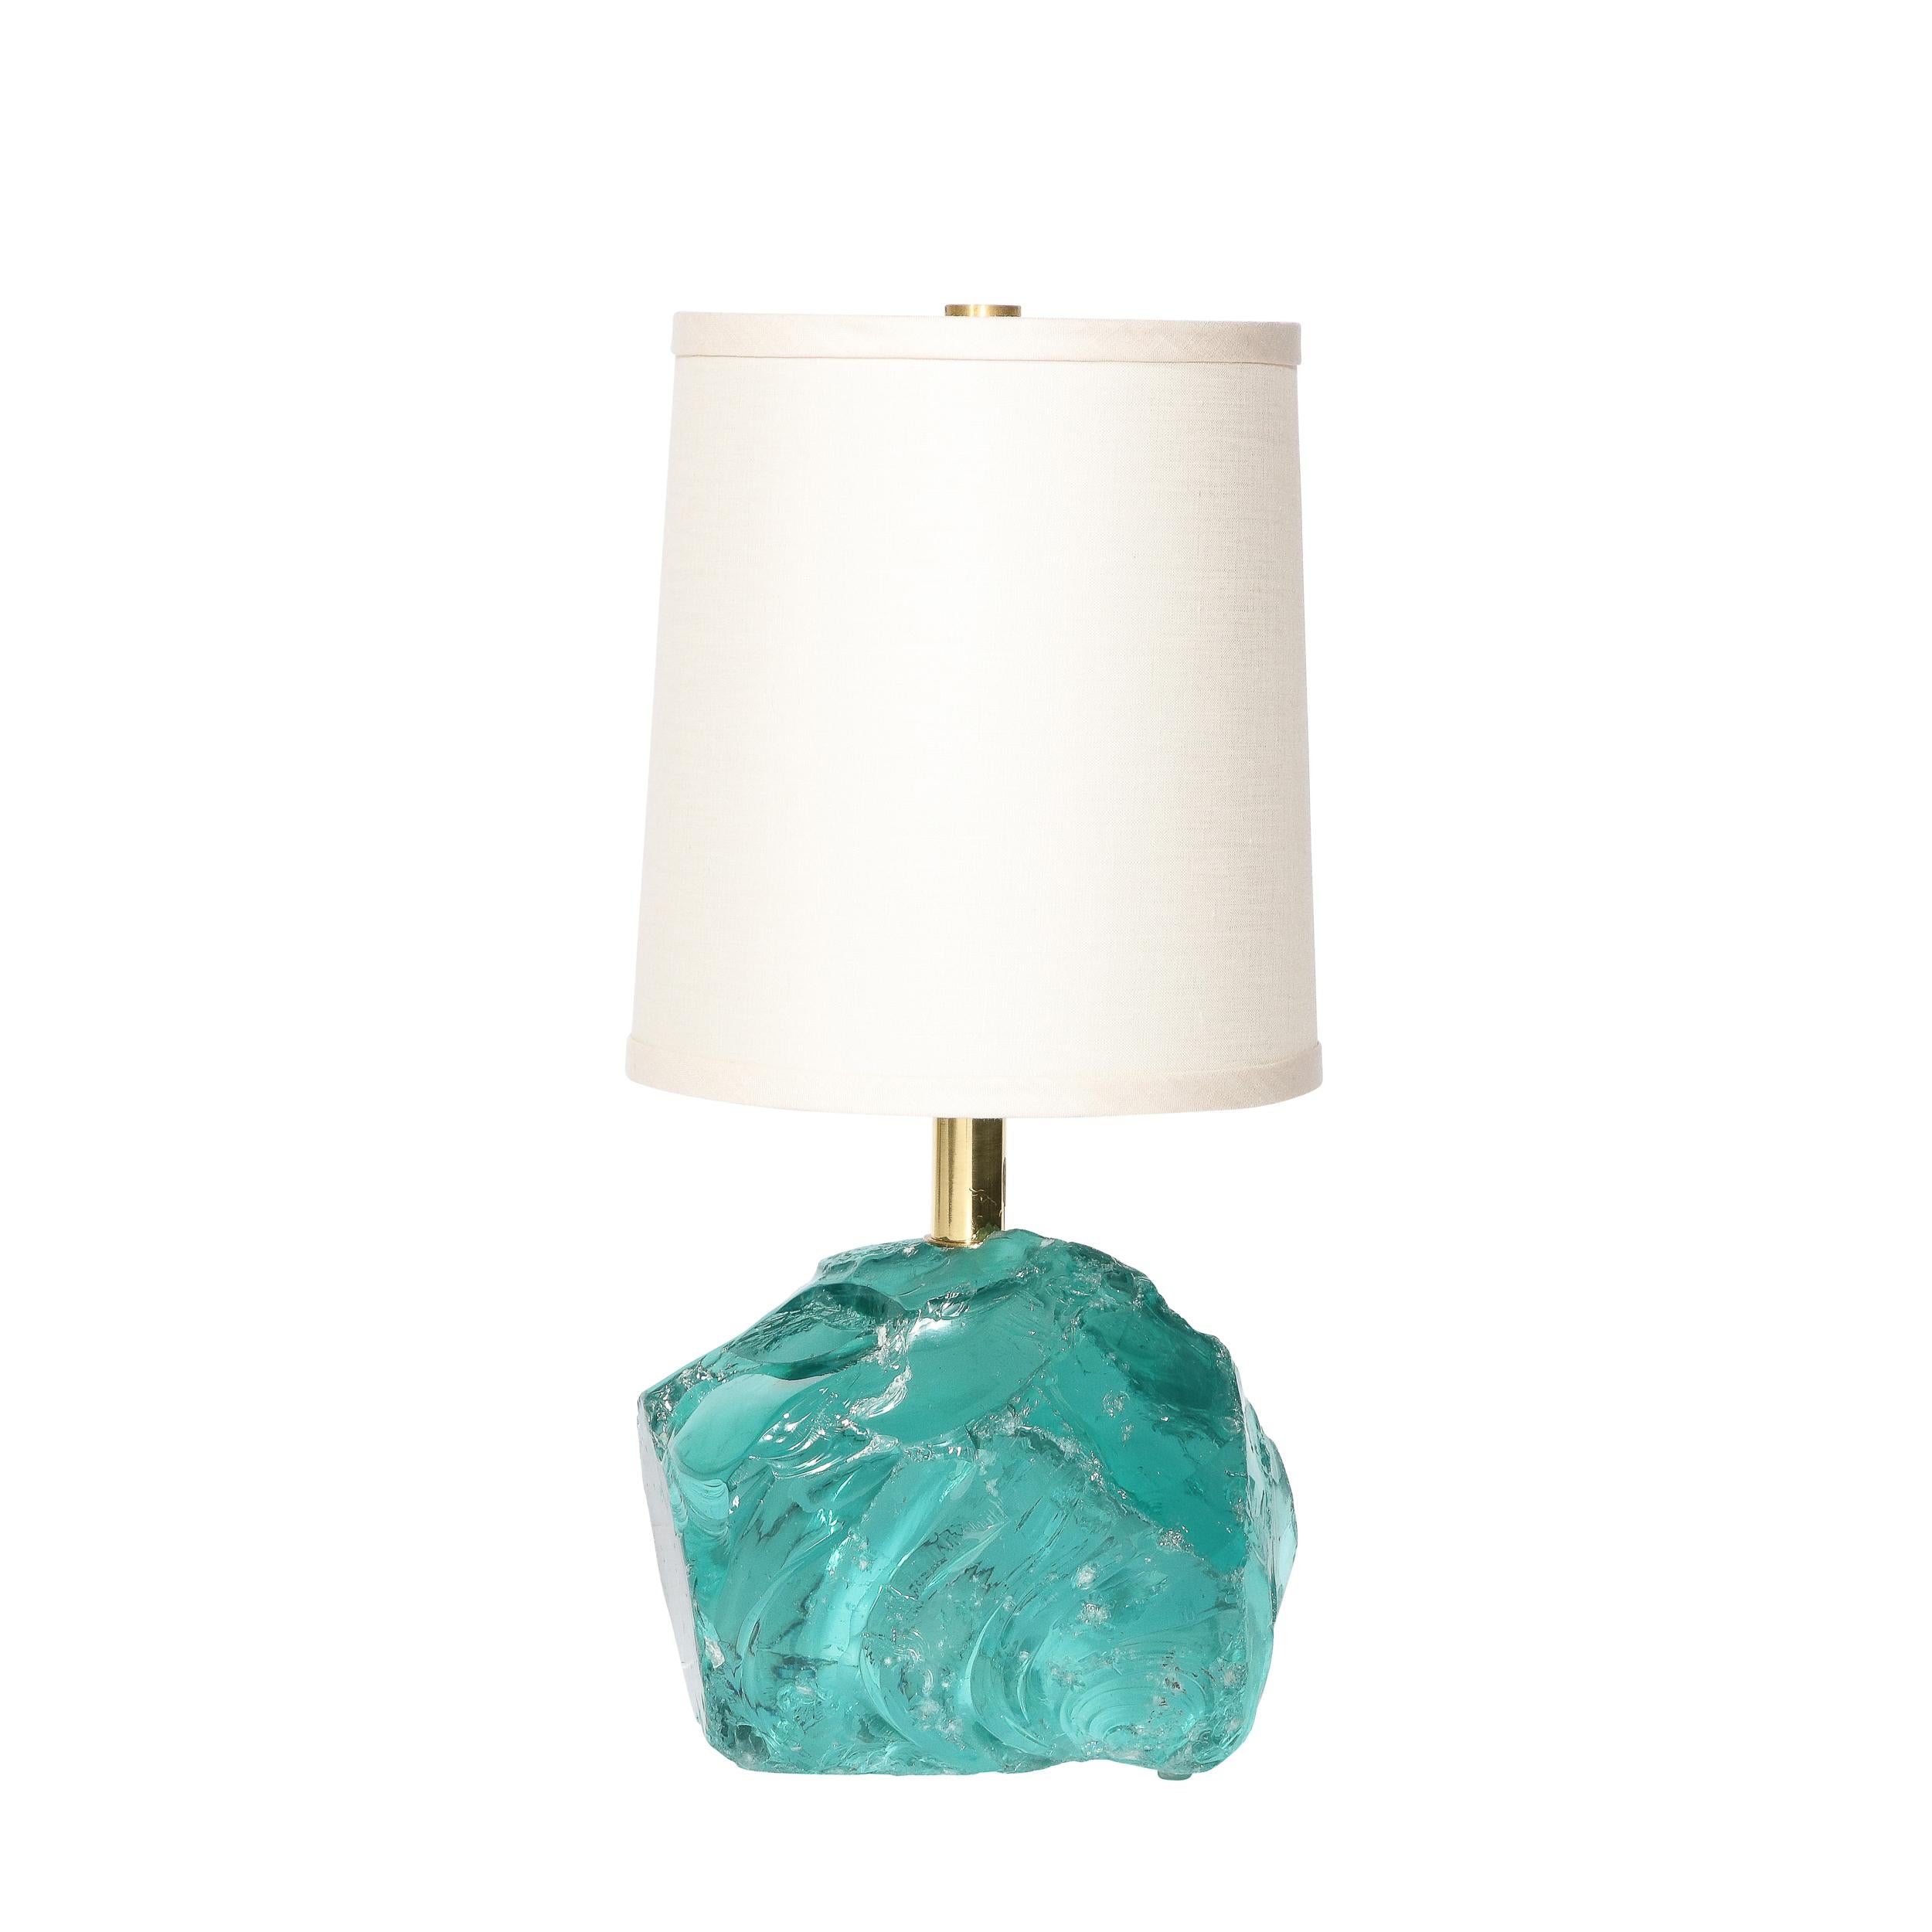 This exquisite pair of handcut aquamarine glass table lamps were hand blown in Murano, Italy- the island off the coast of Venice renowned for centuries for its superlative glass production- during the 21st century. Inspired by the work of Jean